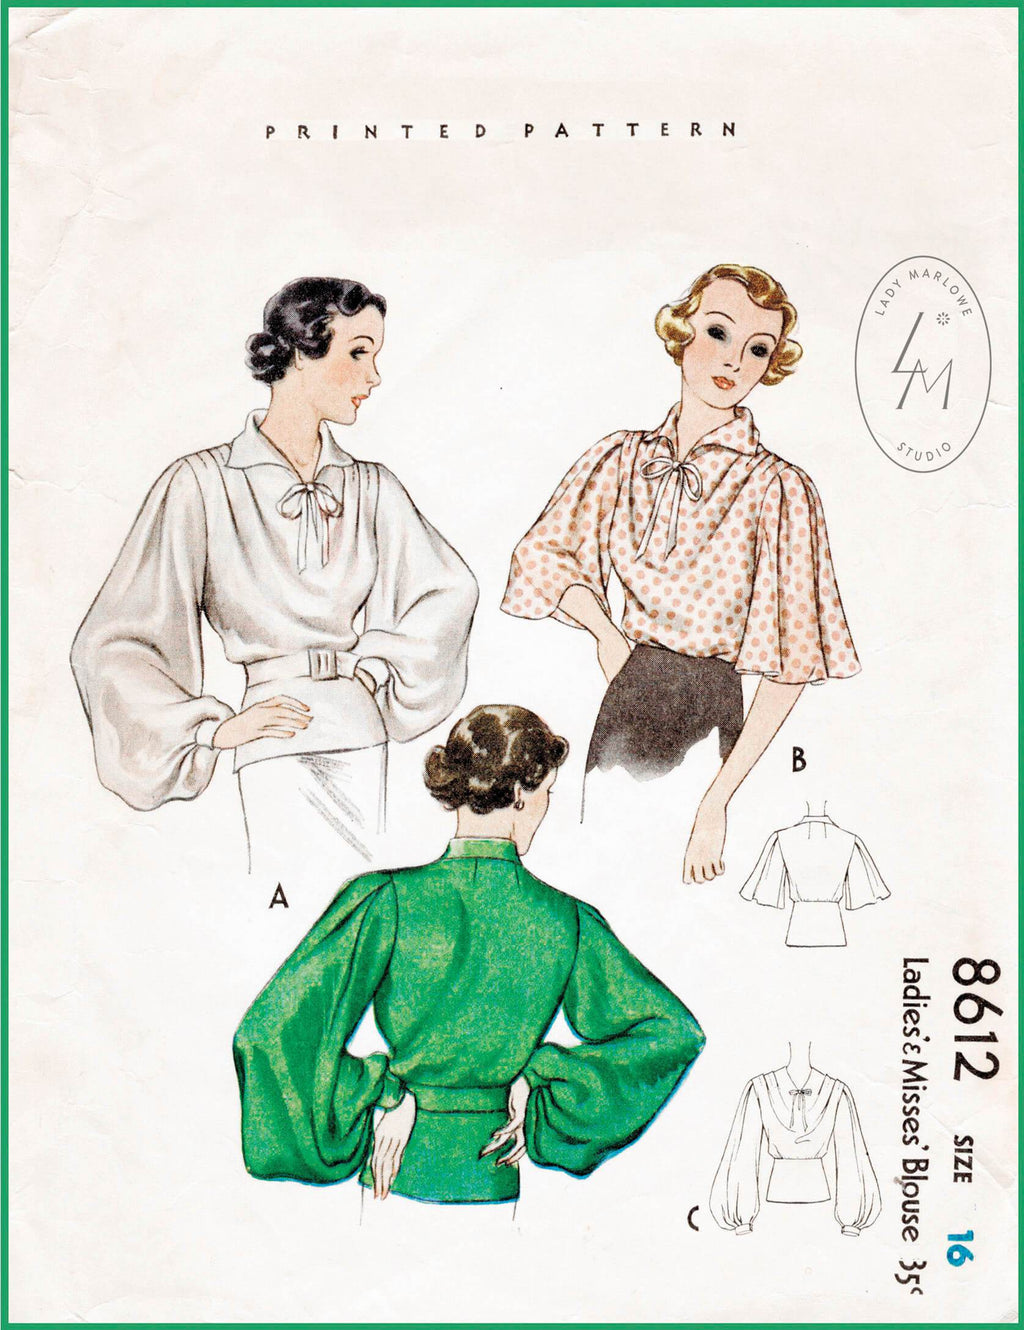 McCall 8612 vintage sewing pattern 1930s 30s pattern women's blouse bishop or flared sleeves art deco style